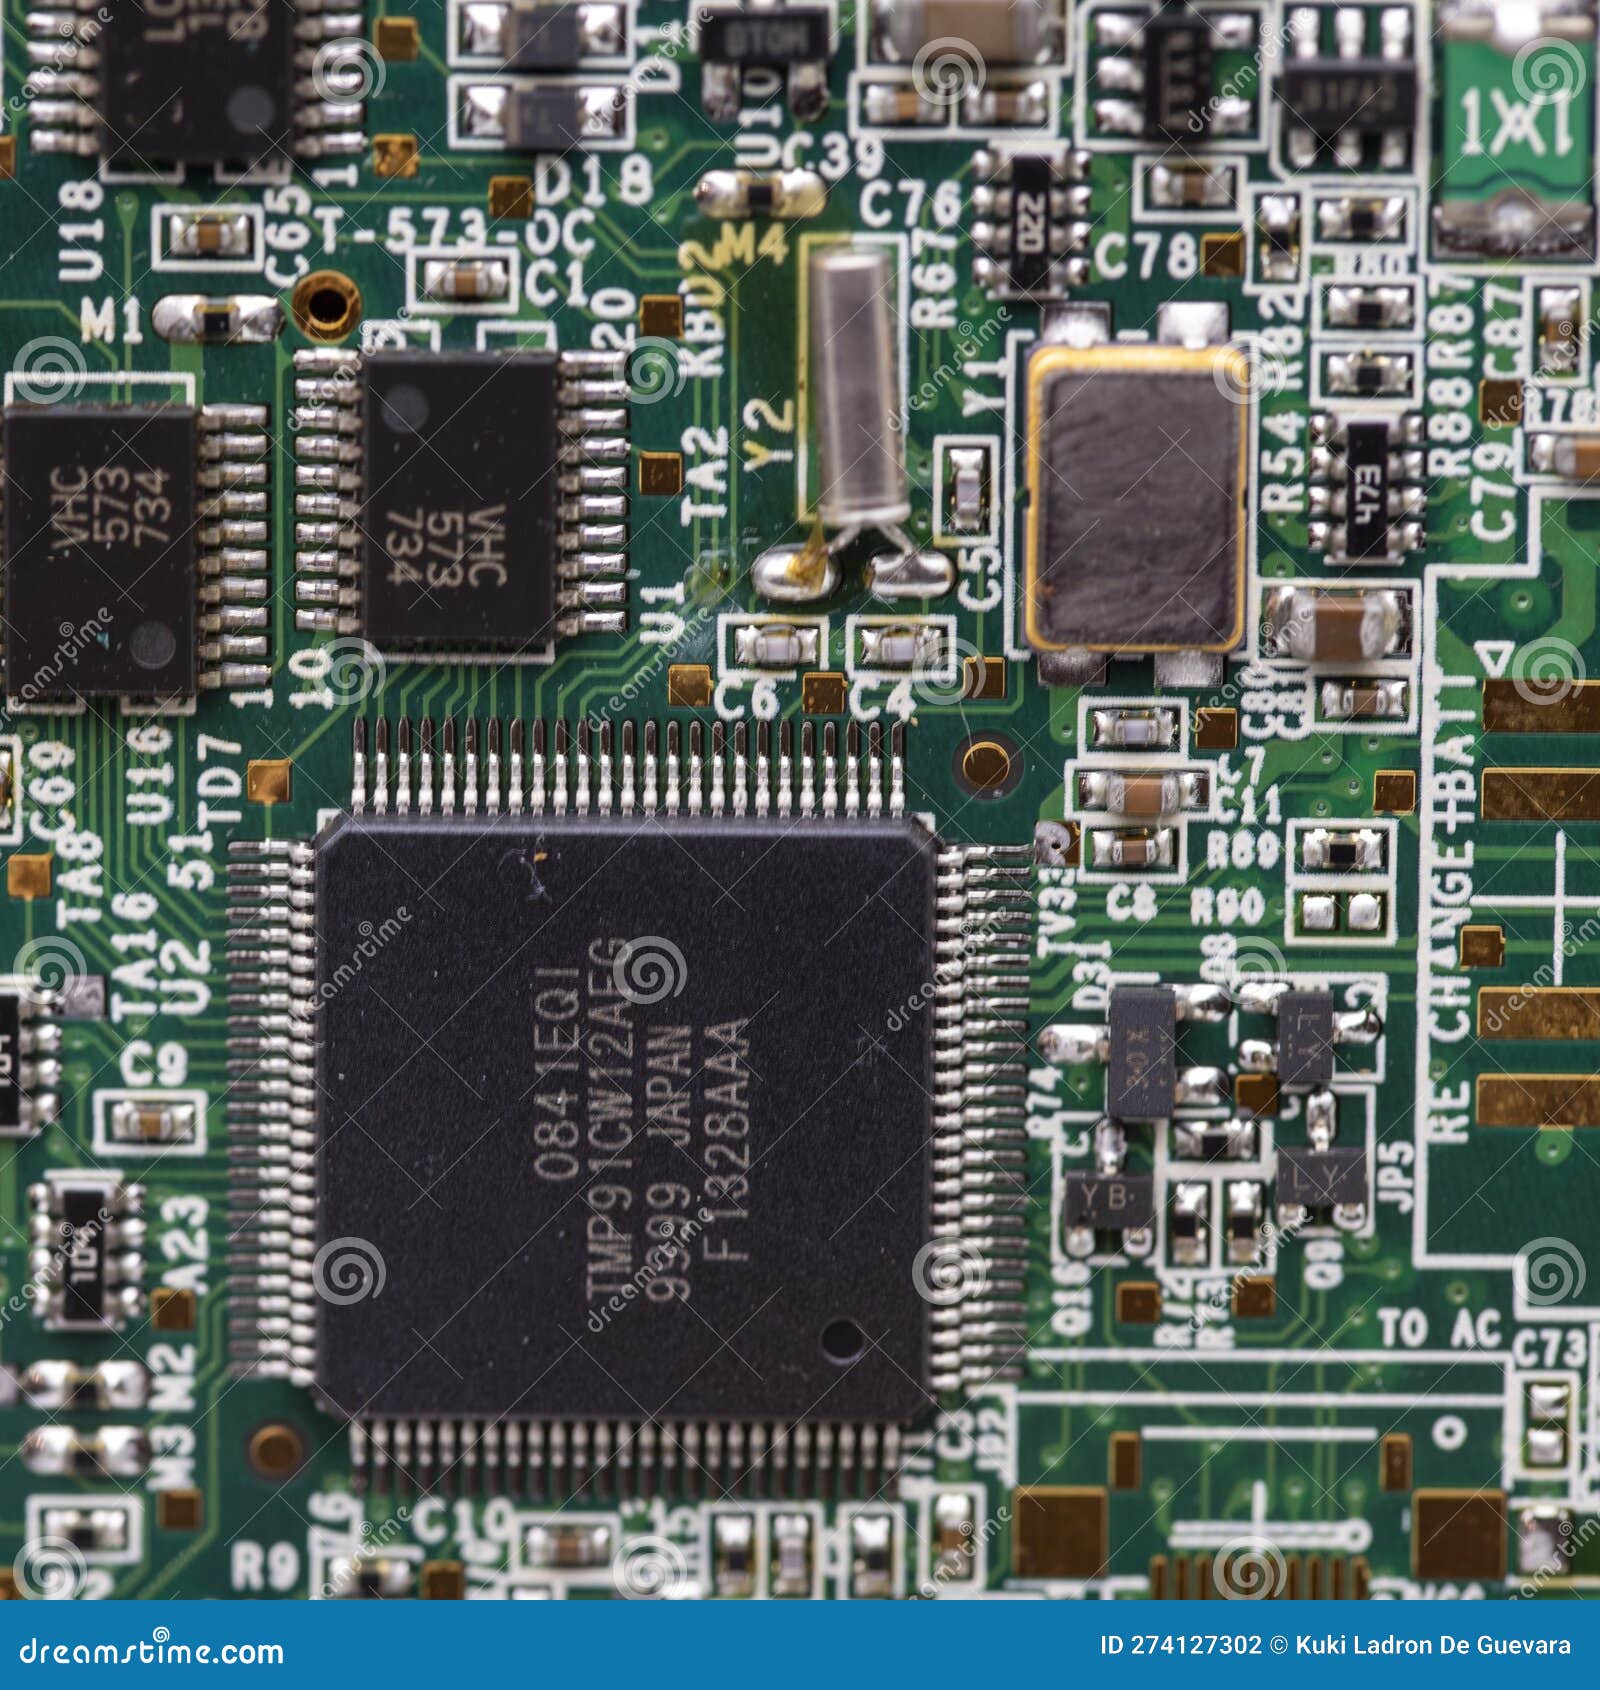 detail of some of the components on an electronic board